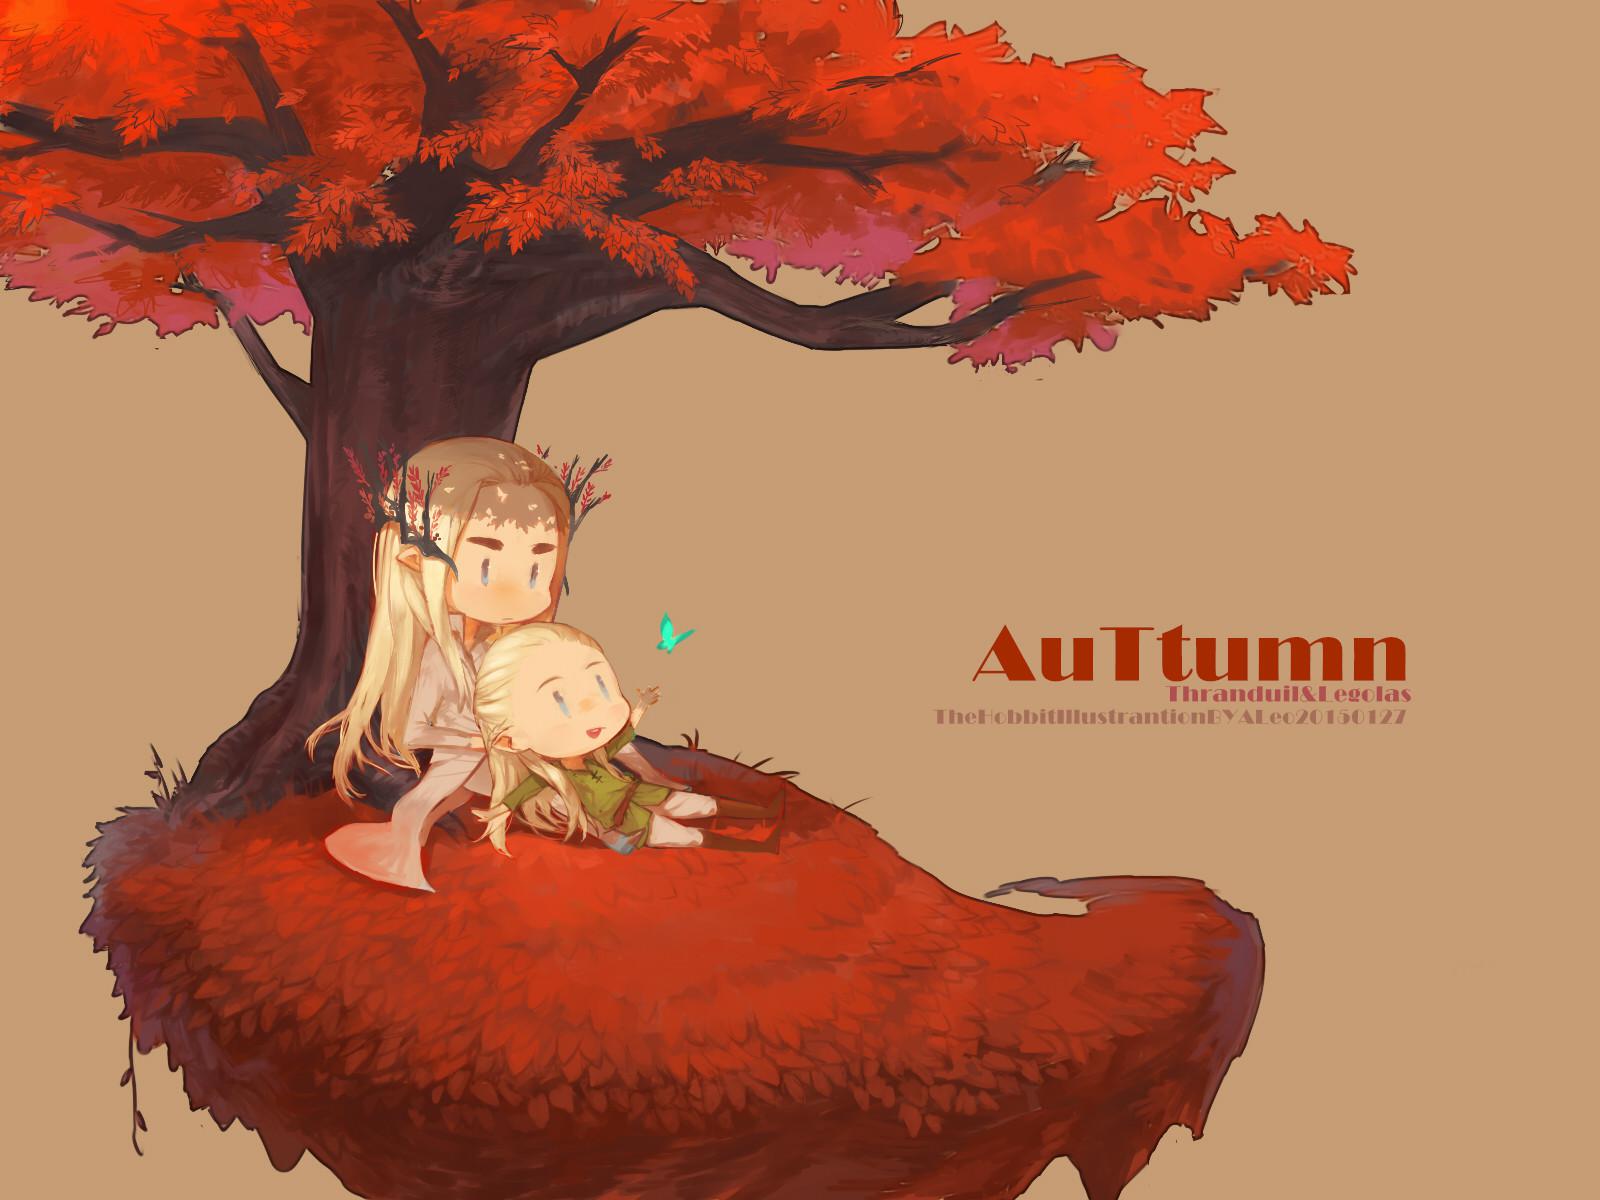 The autumn time for us